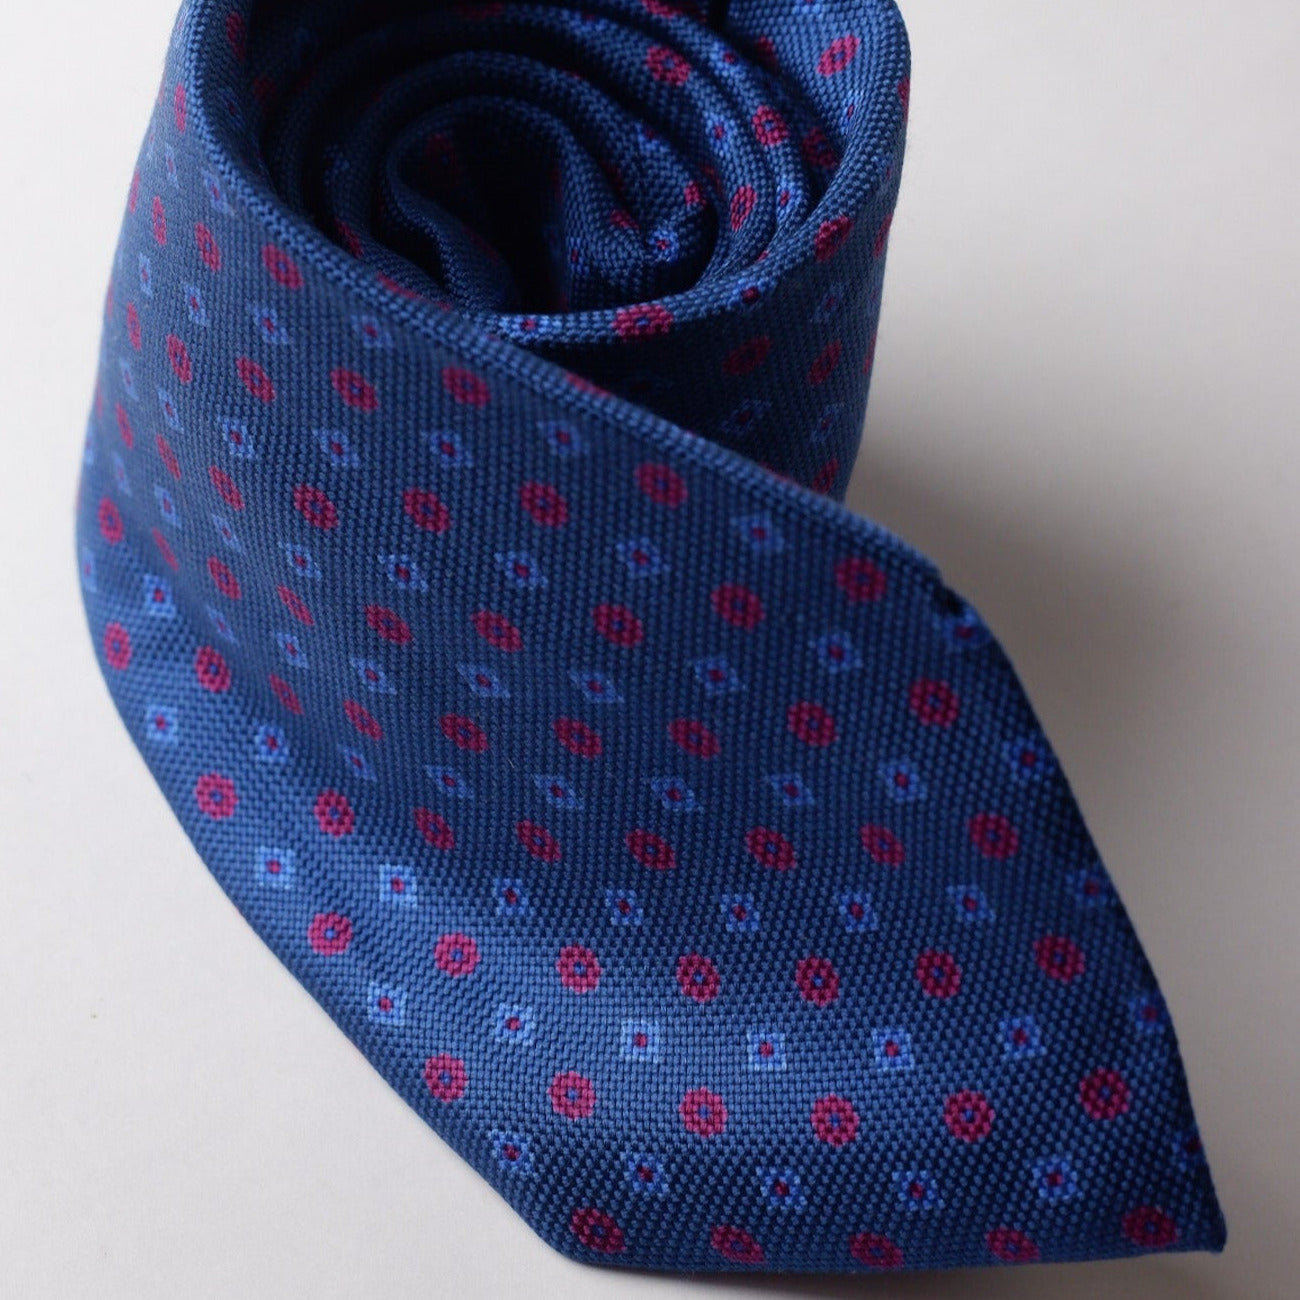 F. Marino Blue with Burgundy and Lilac Flowers Printed Necktie